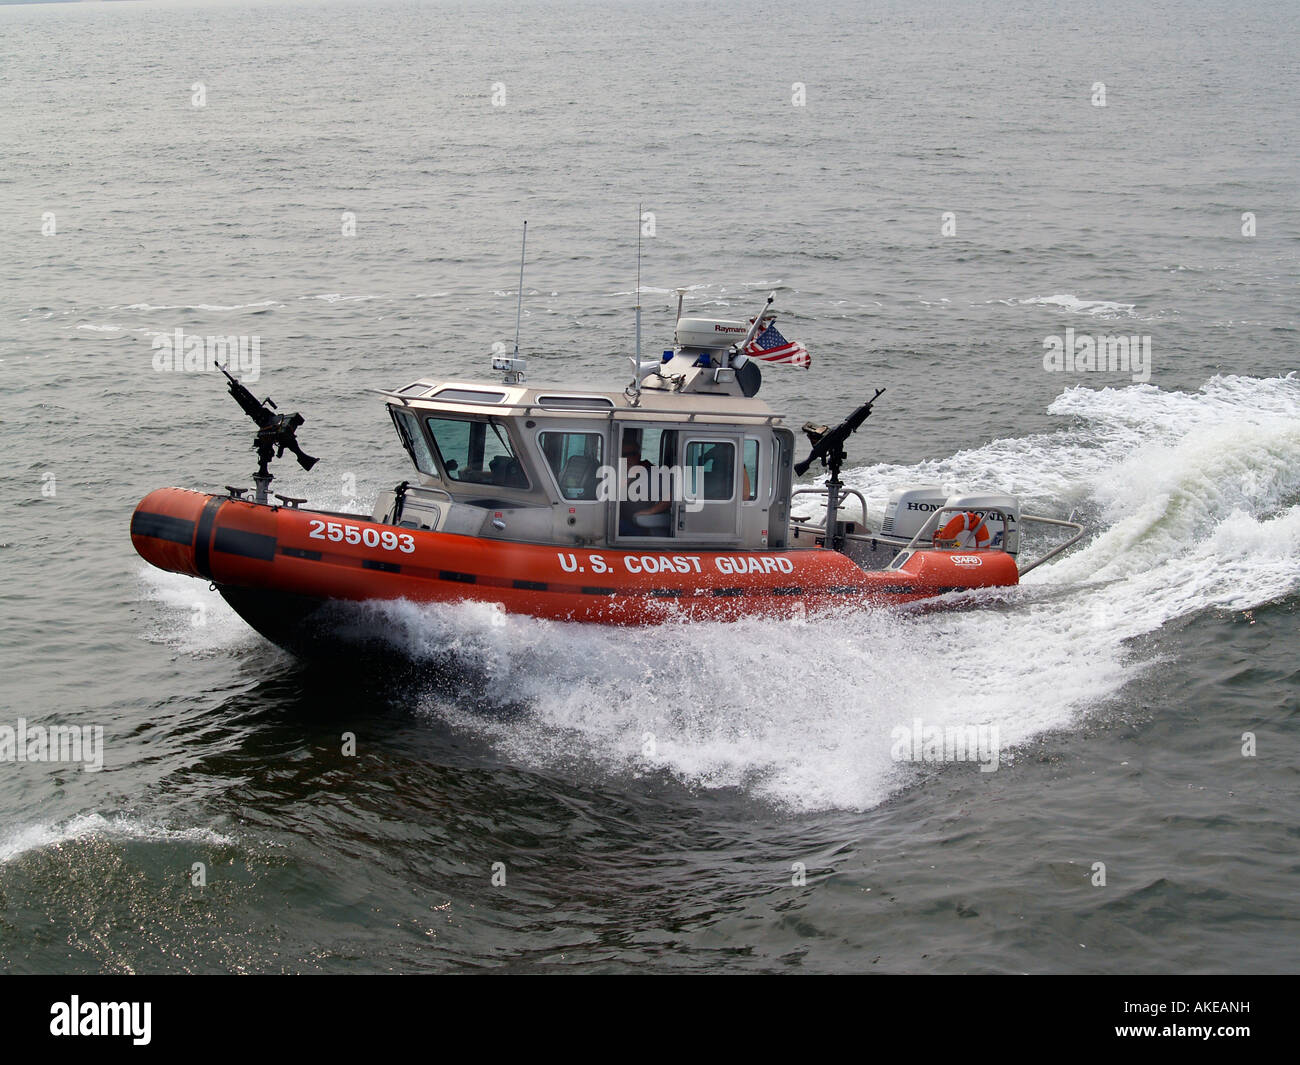 US Coast Guard boat patrolling New York Harbour as a Homeland Security measure. Stock Photo